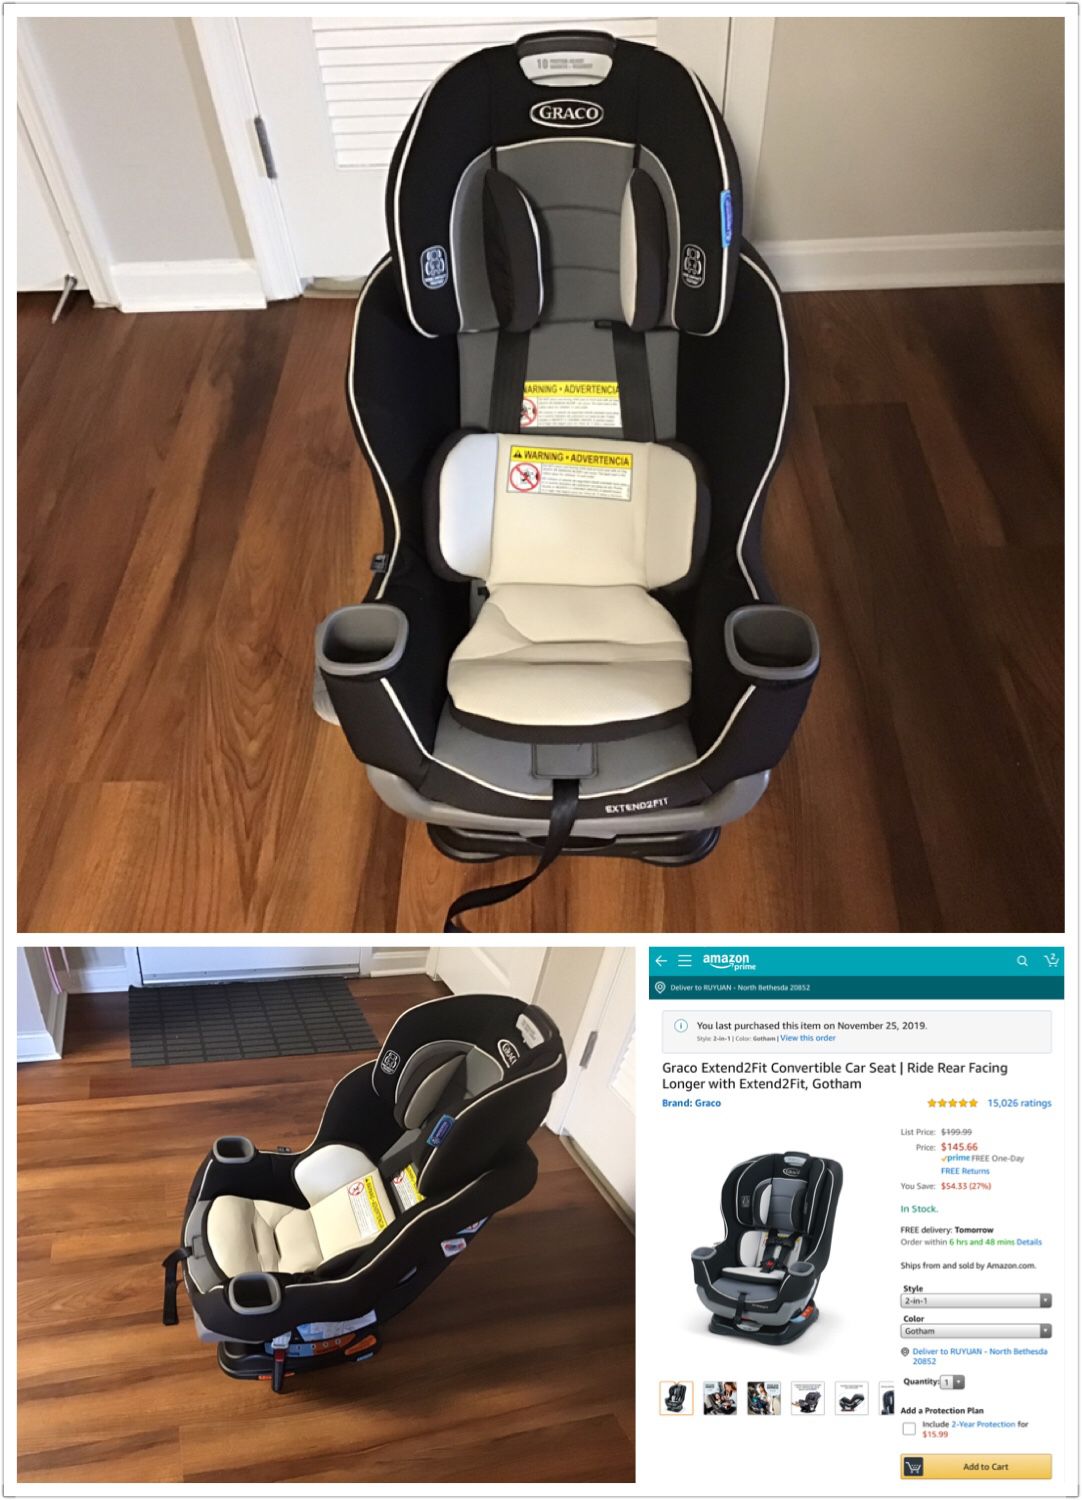 Graco Extend2fit Convertible car seat